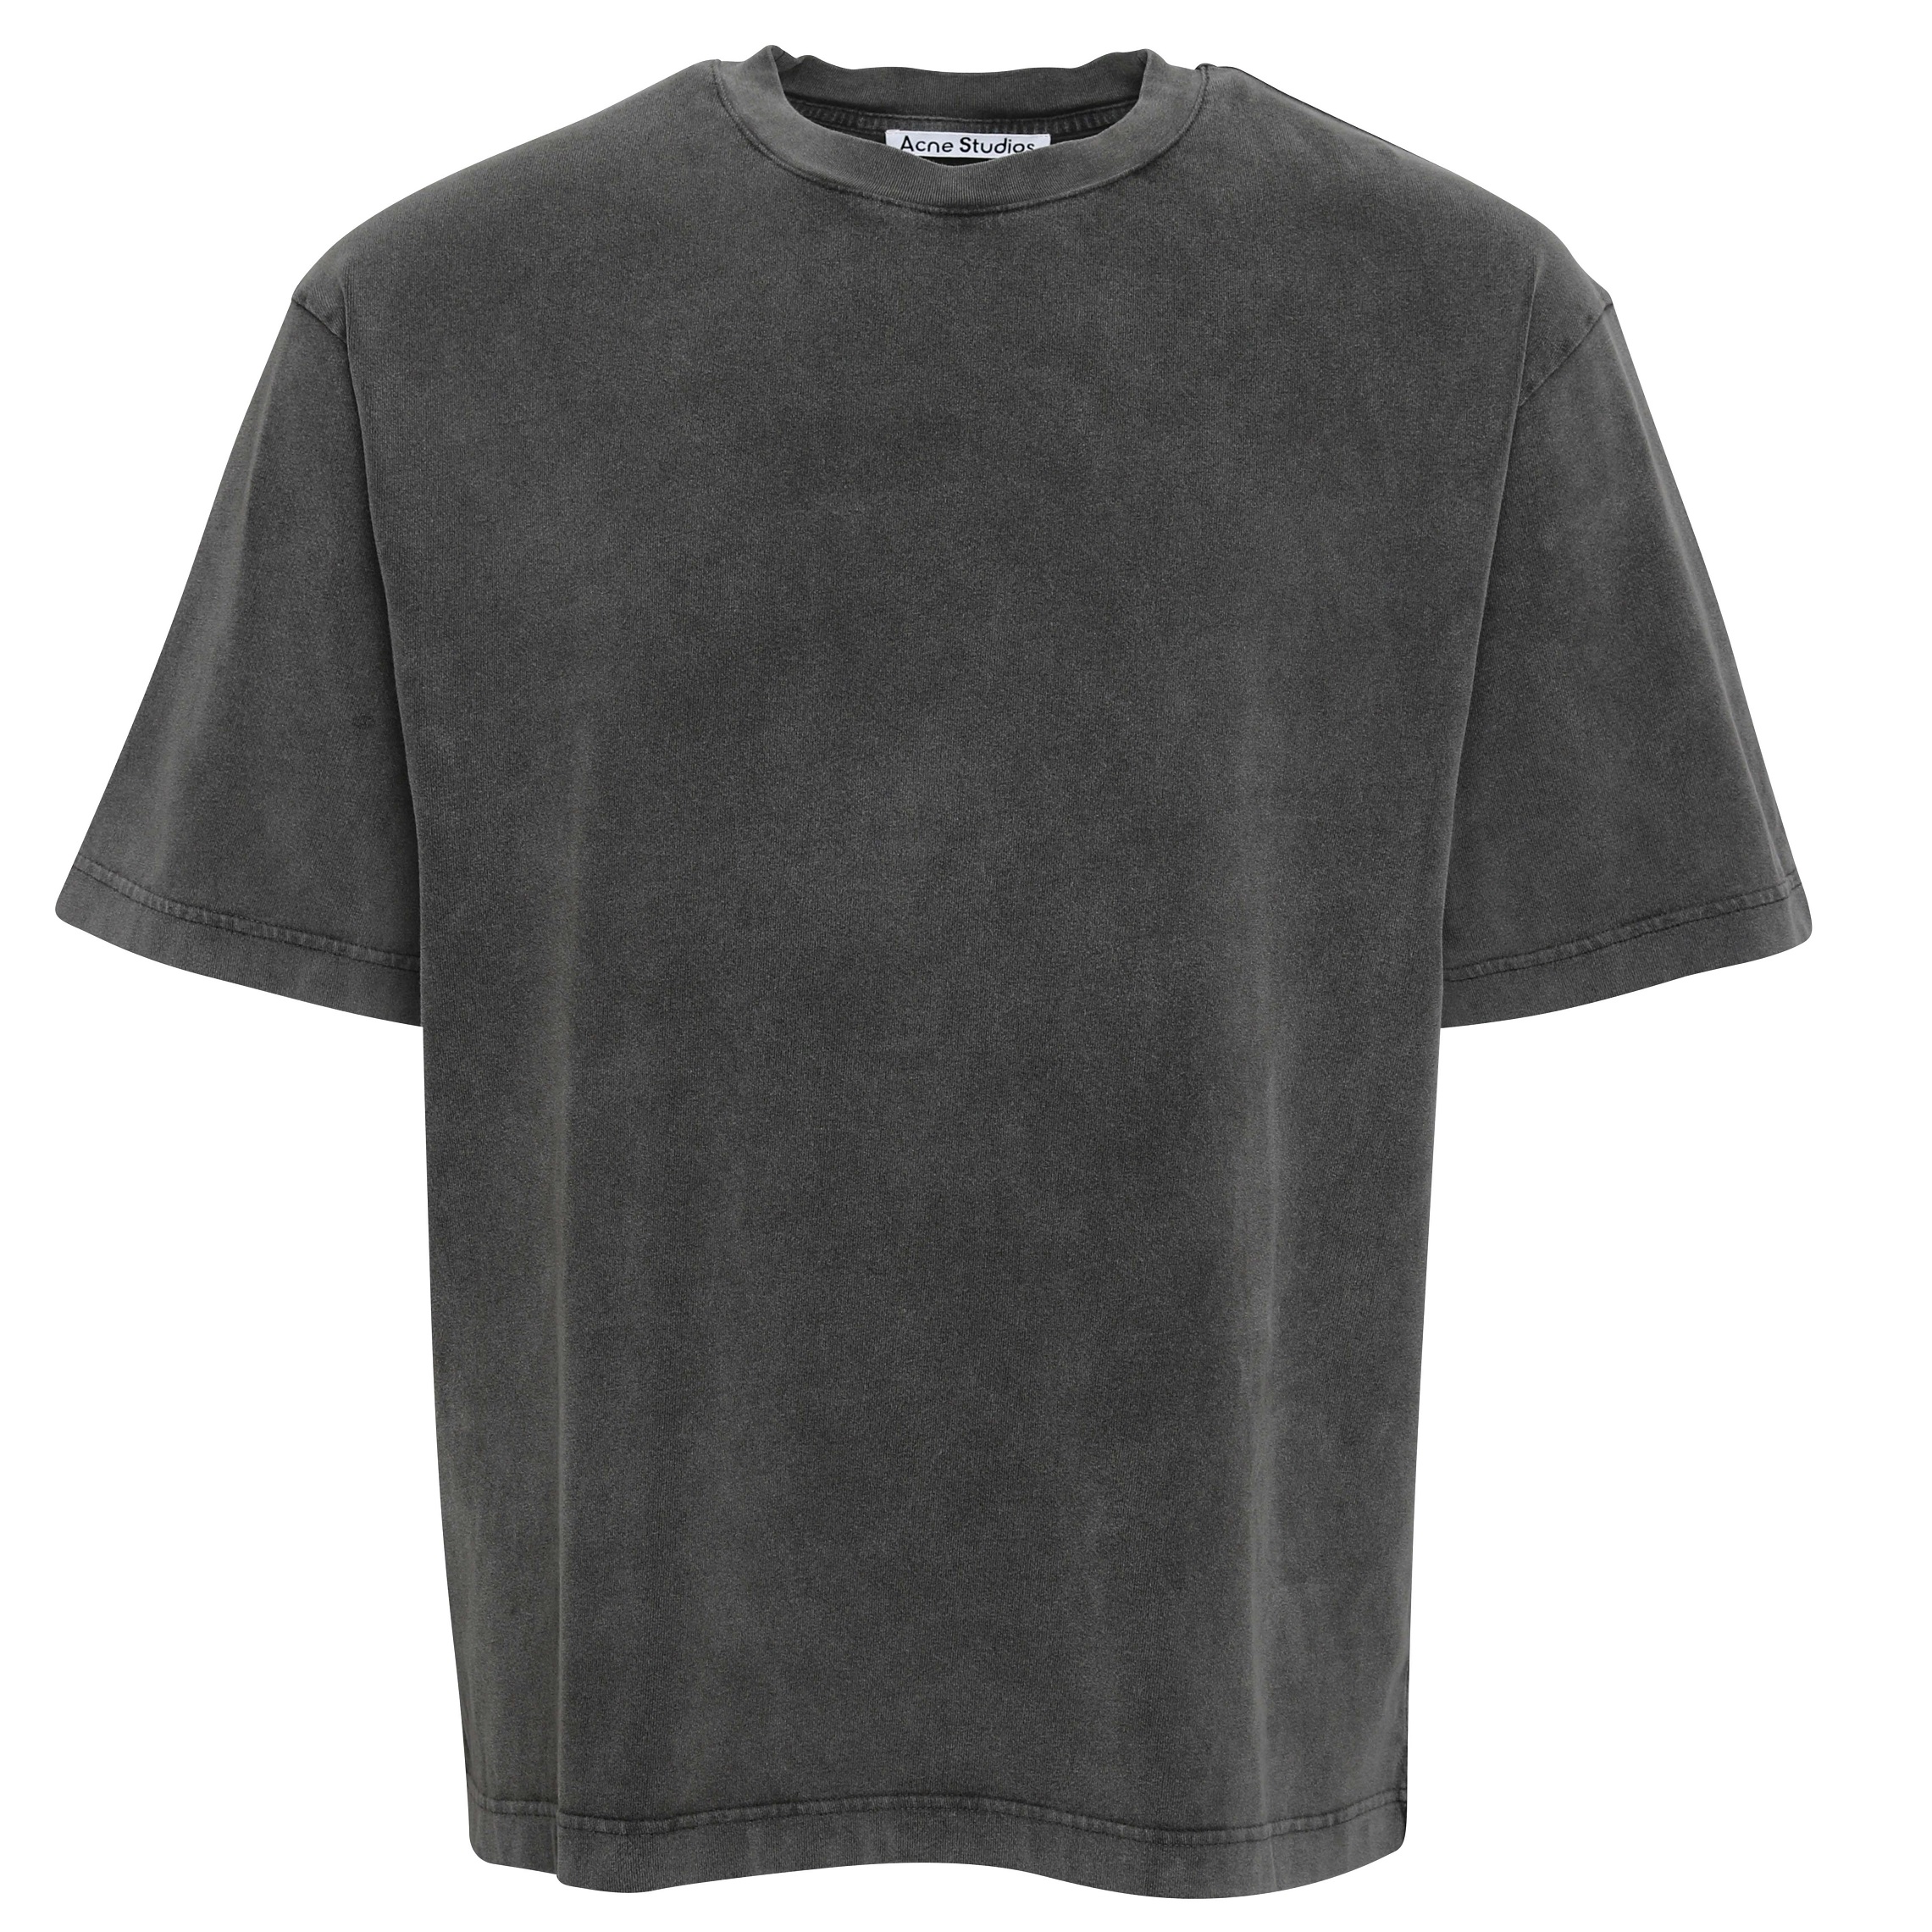 Acne Studios Vintage T-Shirt in Faded Black S